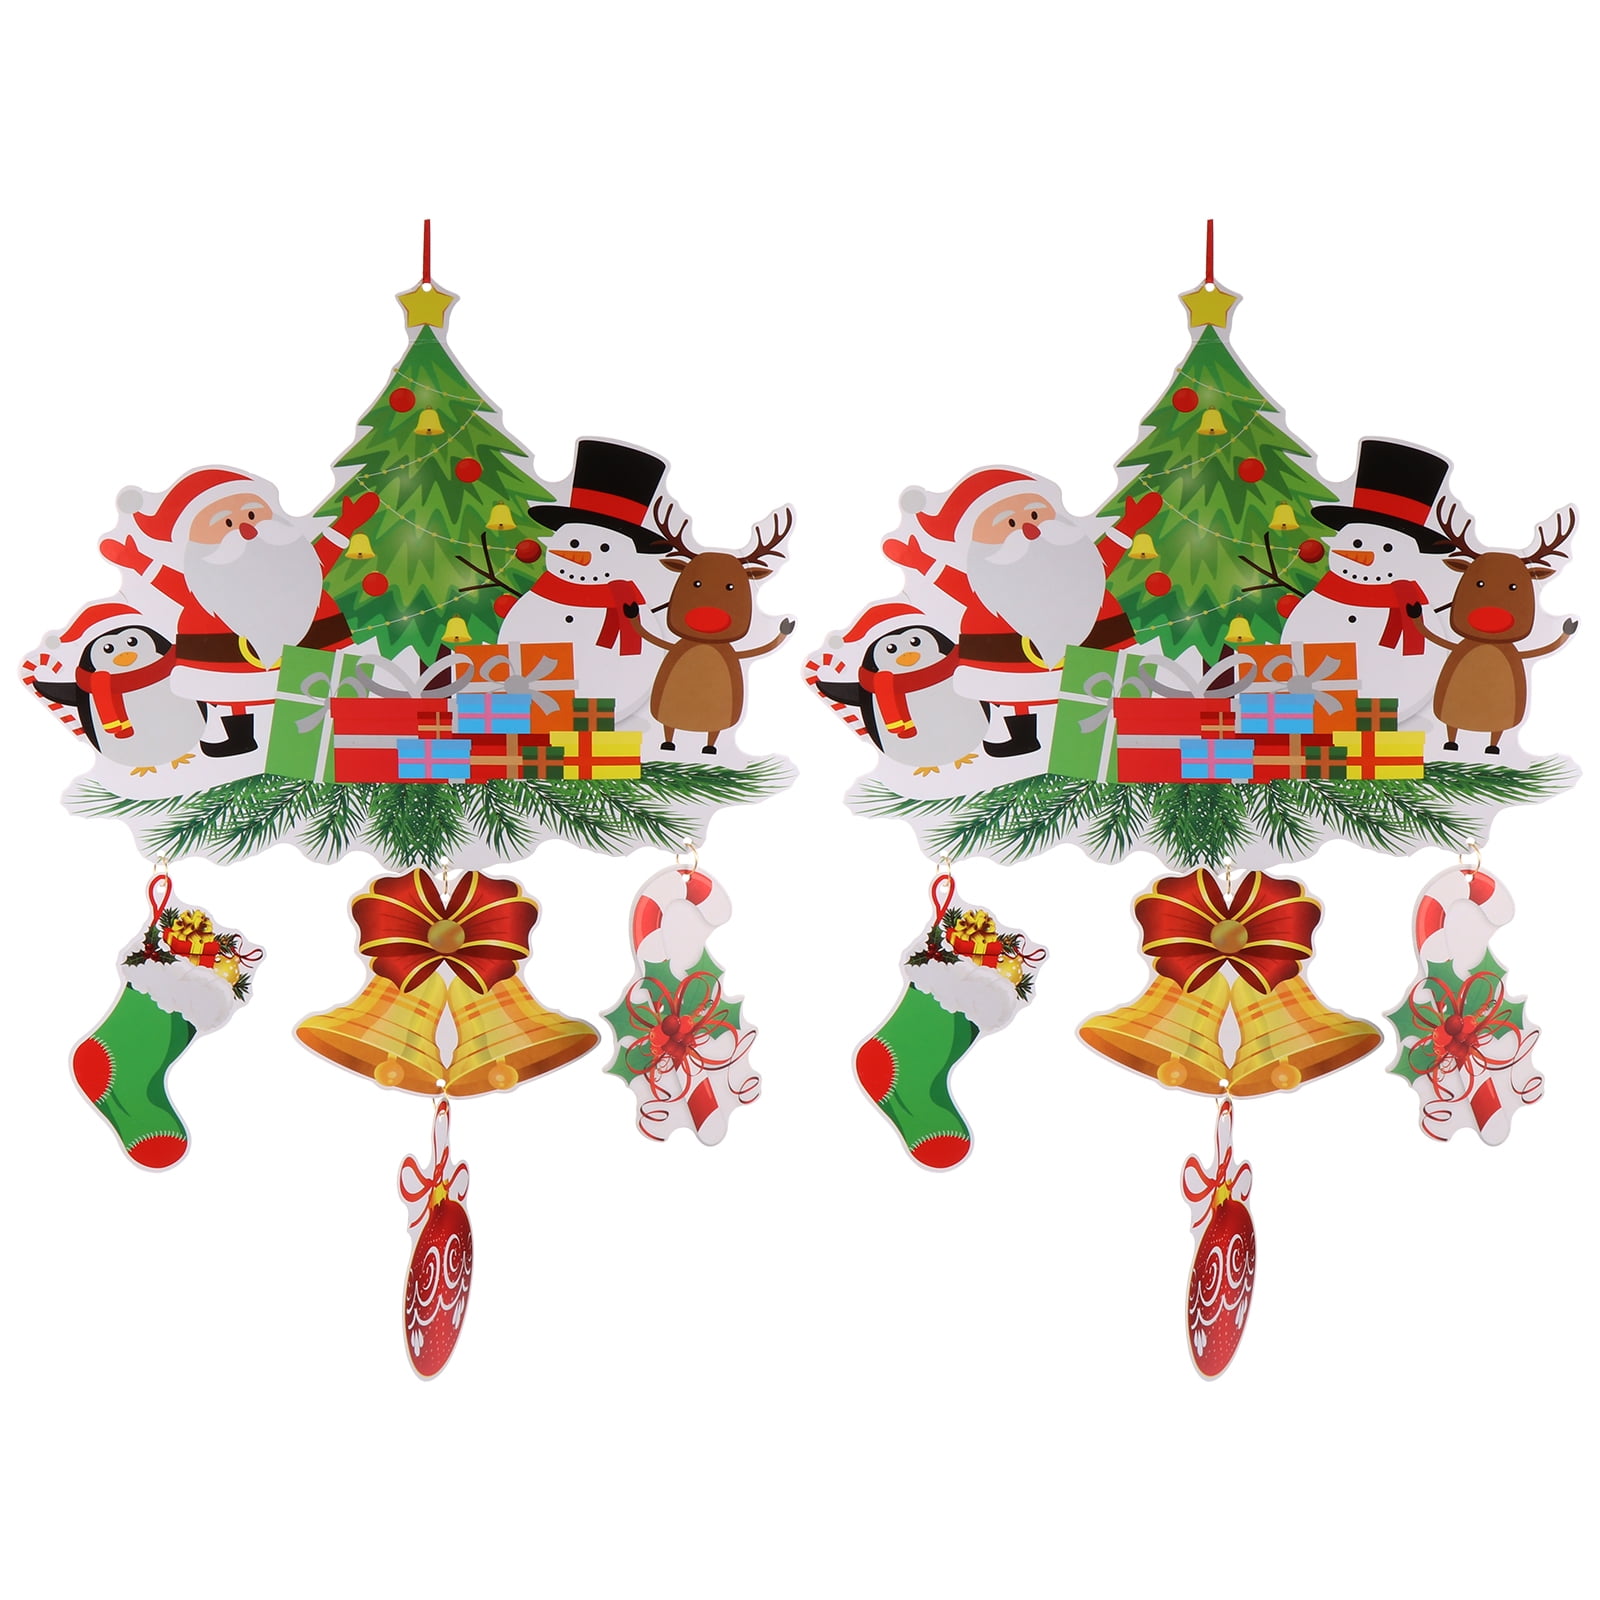  36 Sets Christmas Clear Plastic Flat Disc Ornaments with Led  Balloon Lights Christmas Tree Hanging Fillable Ball Ornaments with Buffalo  Plaid Bows for Holidays Party DIY Crafts Decoration : Home 